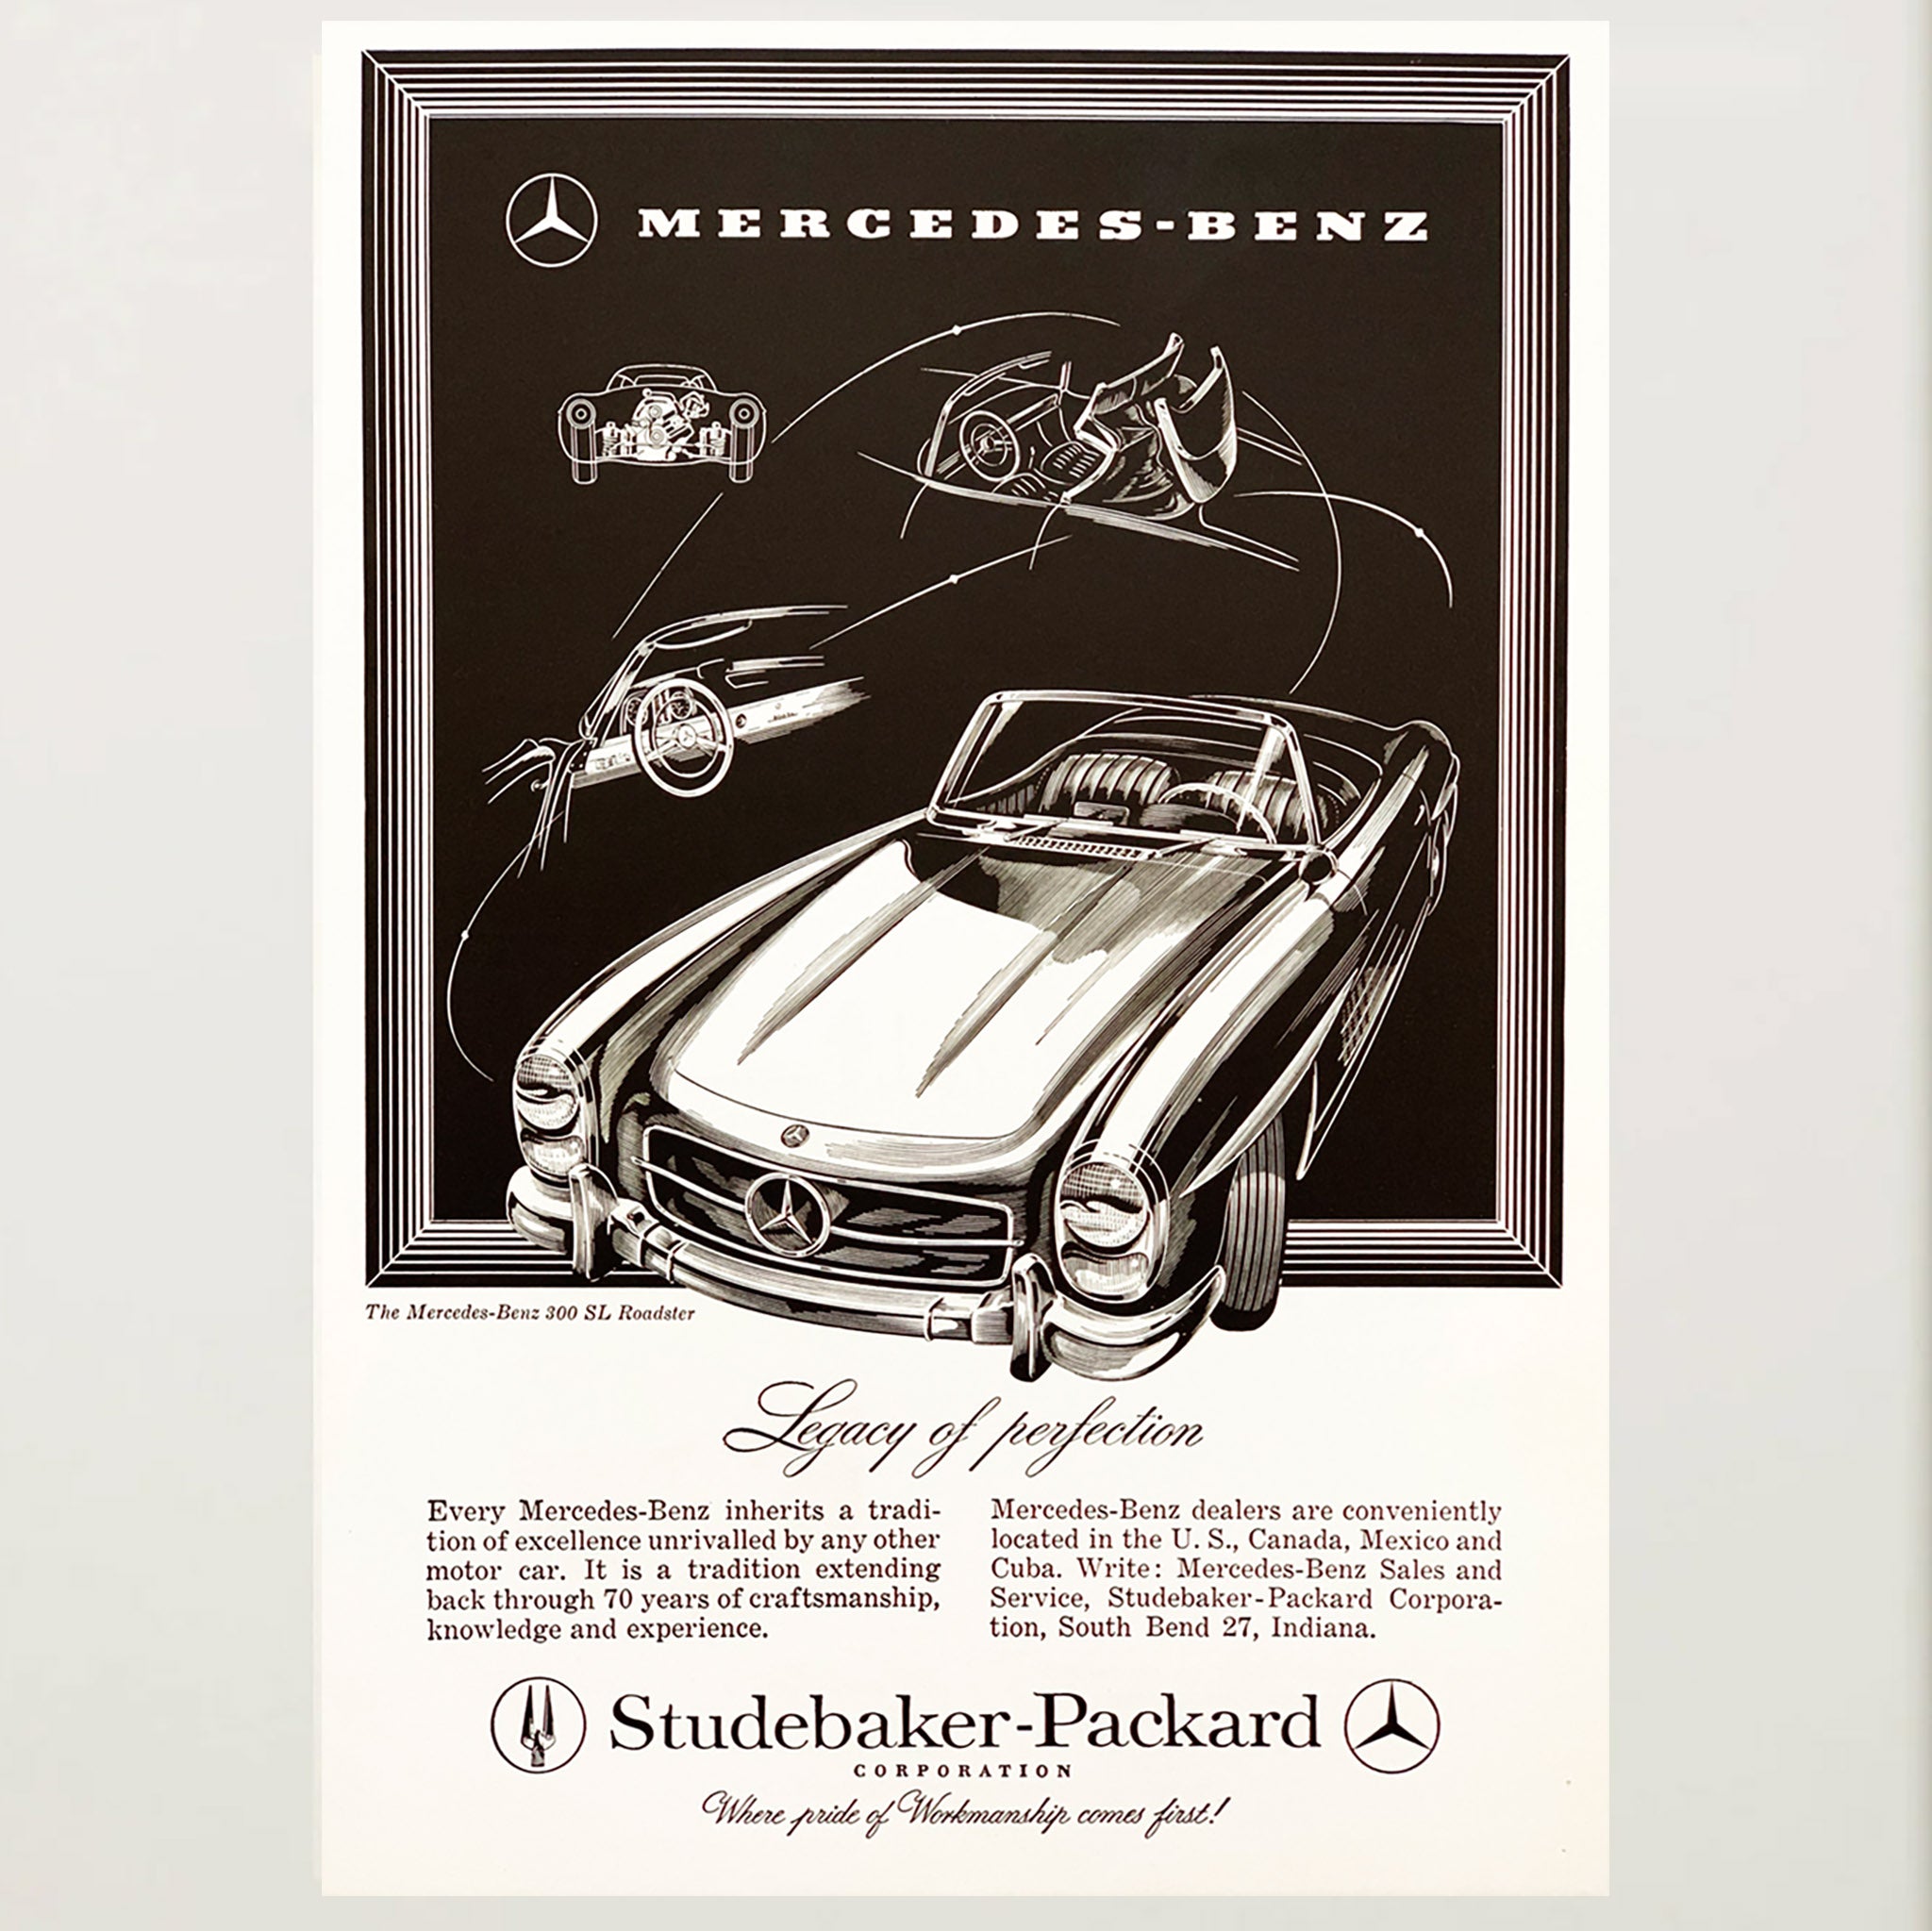 Framed Mercedes-Benz Legacy of Perfection Advertisement